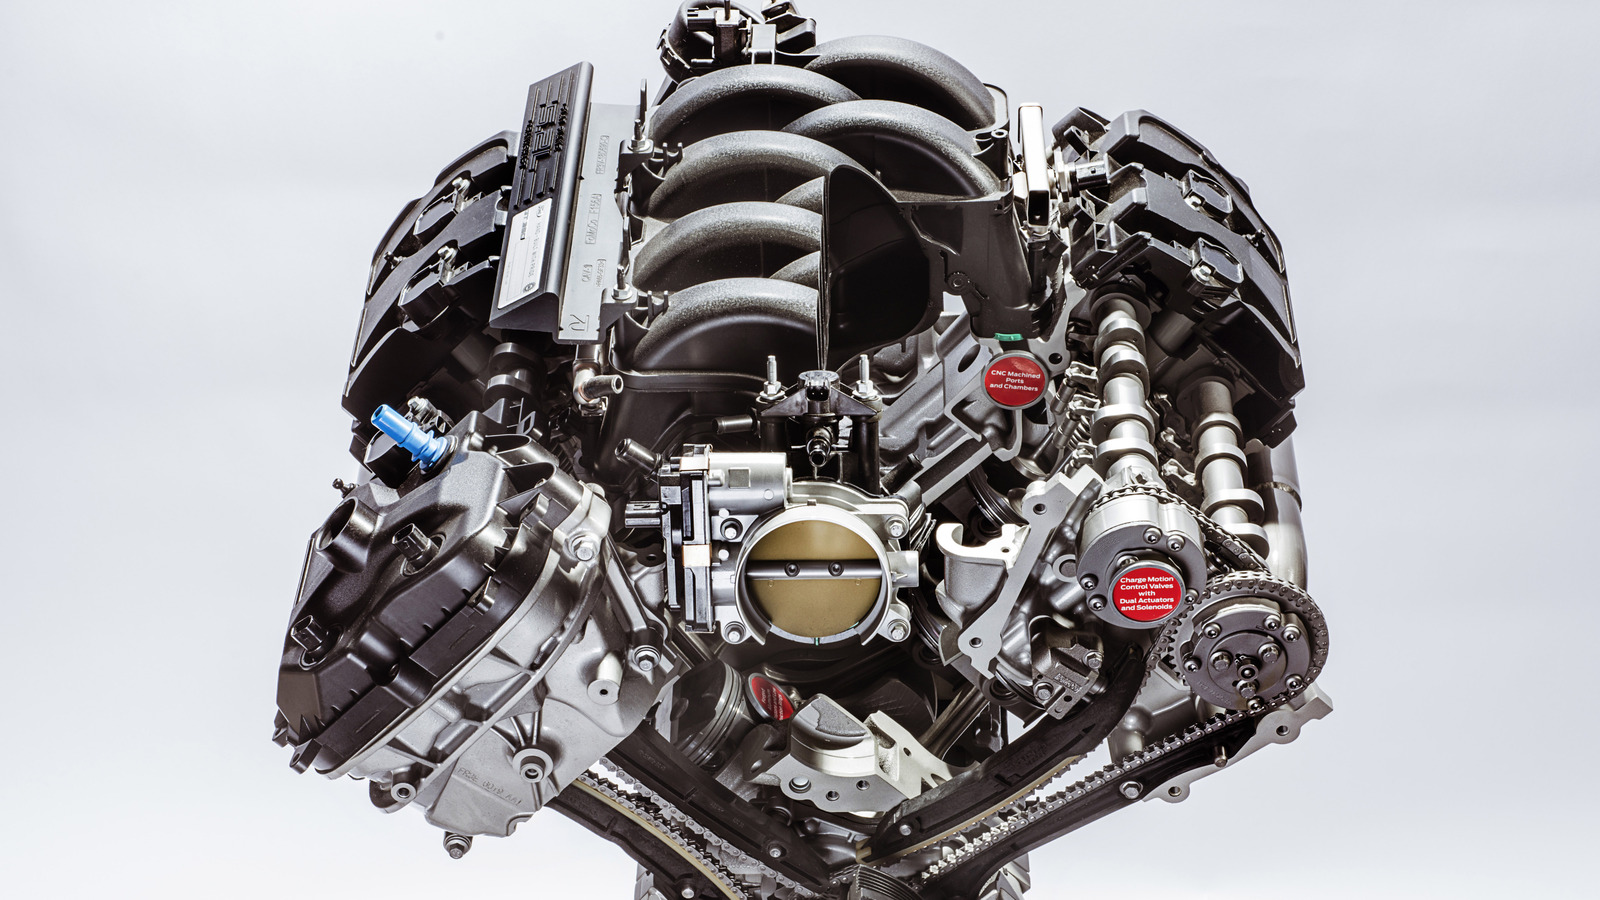 Here’s What Makes Ford’s 5.2L Voodoo V8 Engine So Special – SlashGear